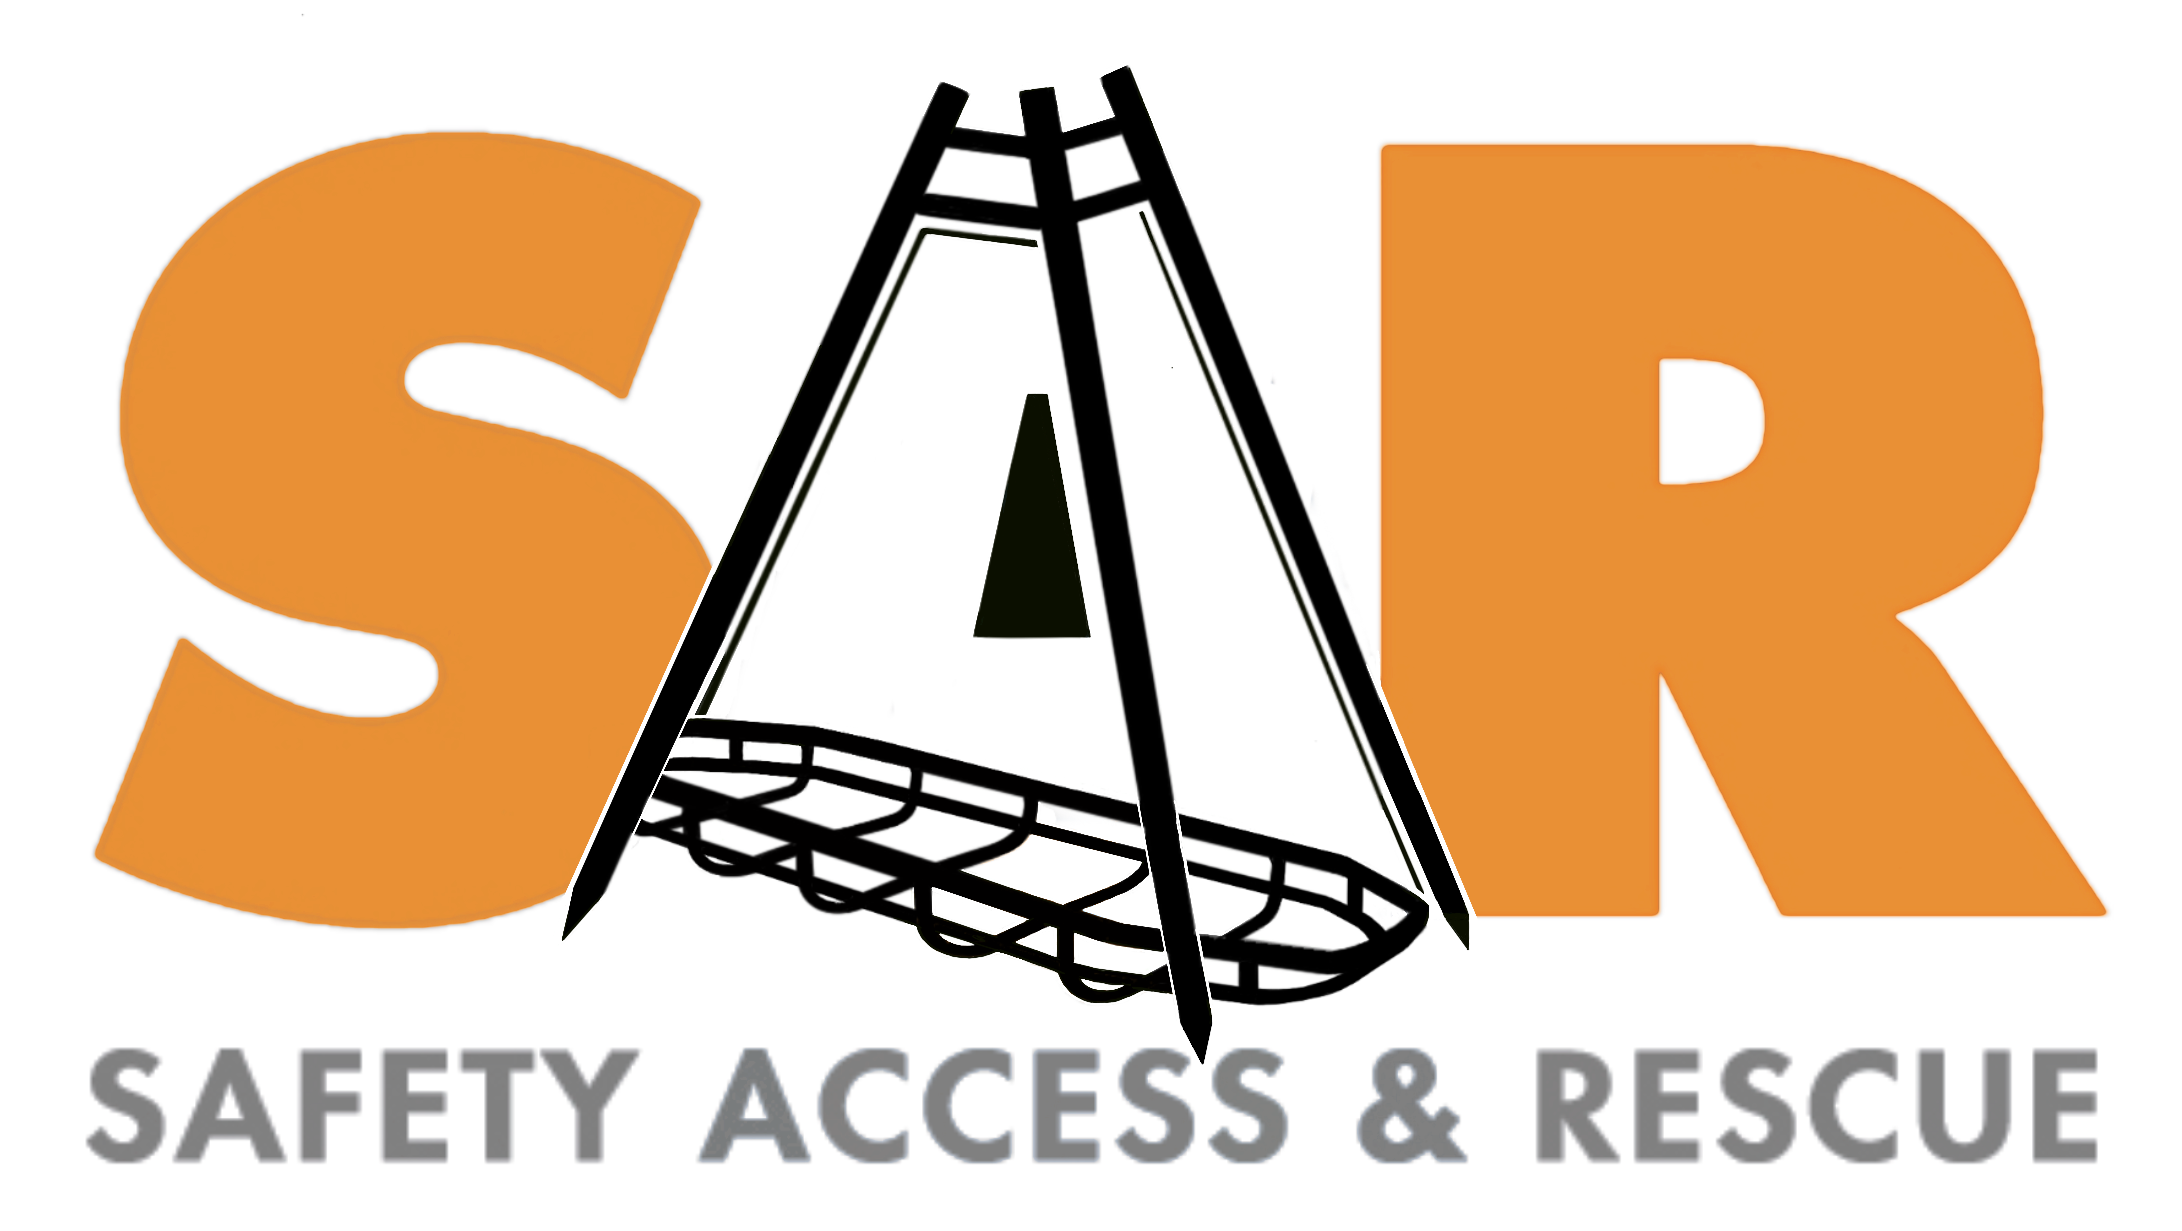 Safety Access & Rescue